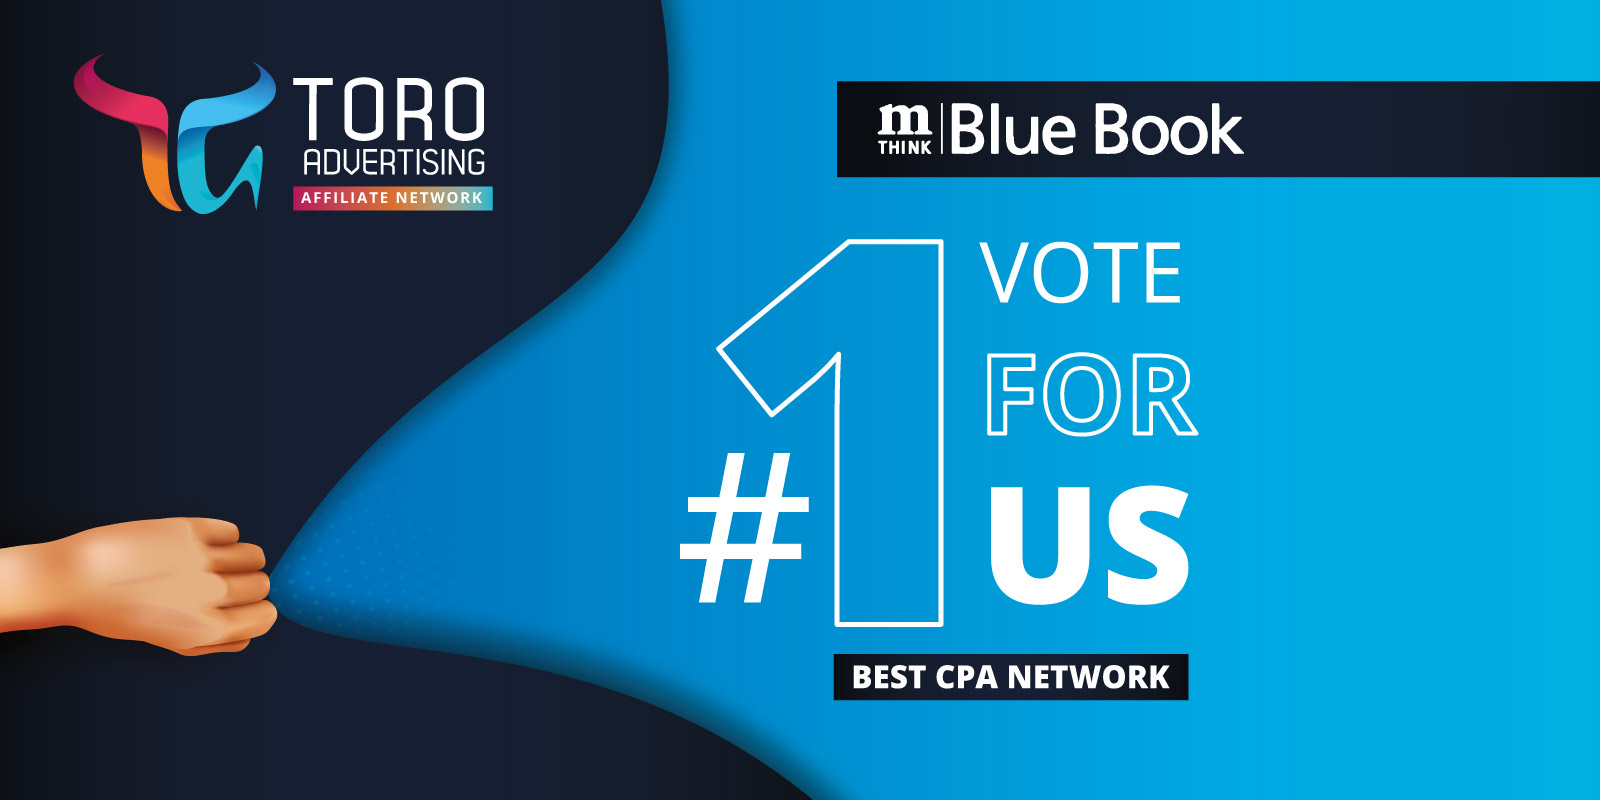 mthink blue book nominations 2022